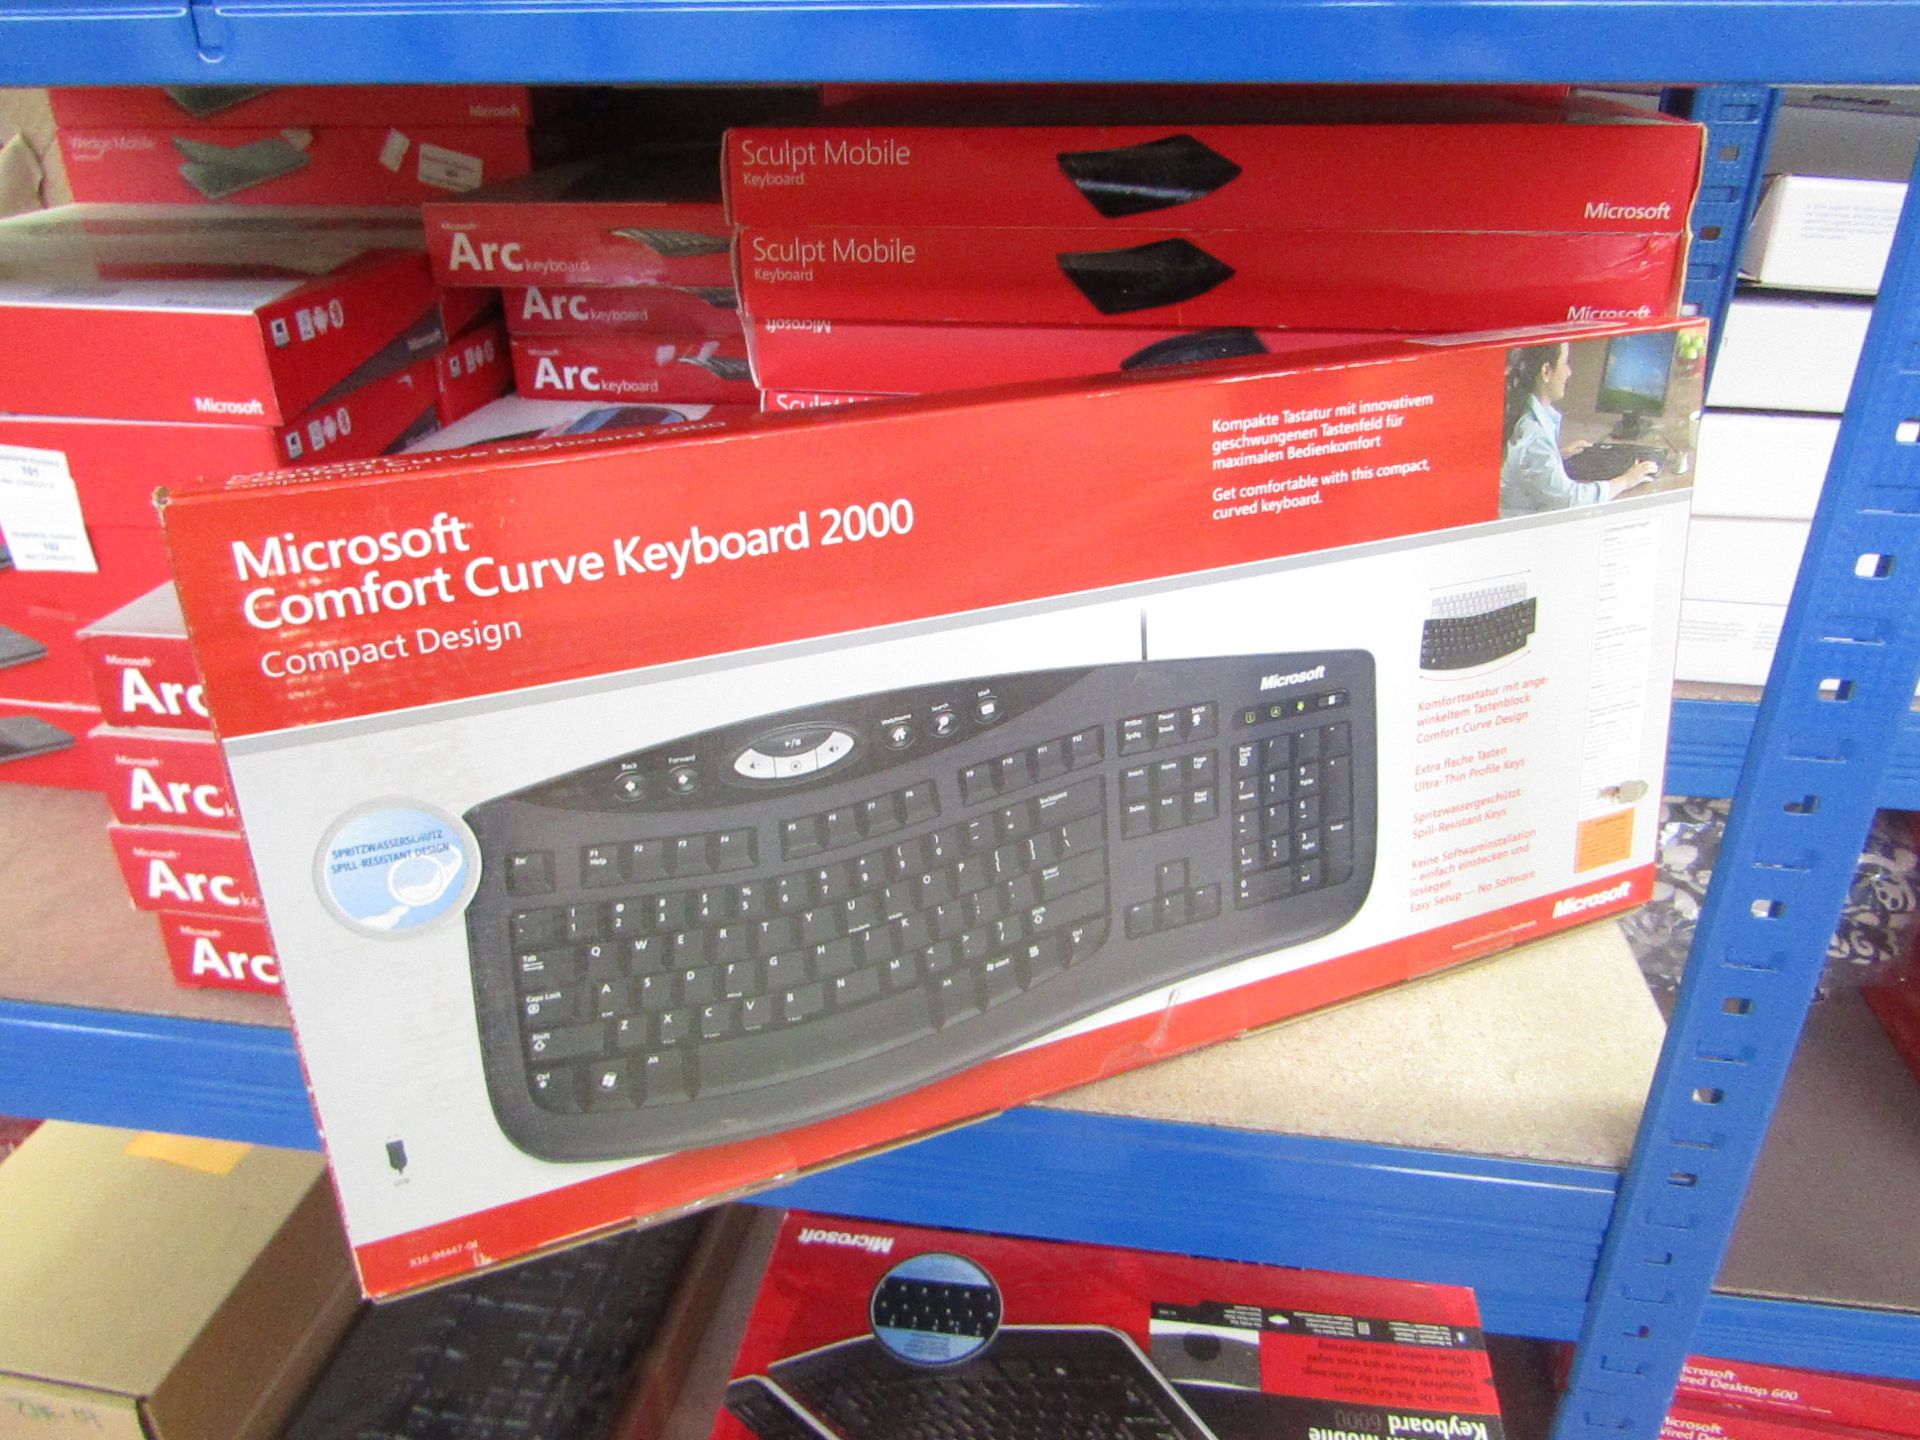 Microsoft comfort curve keyboard 2000, tested working and boxed